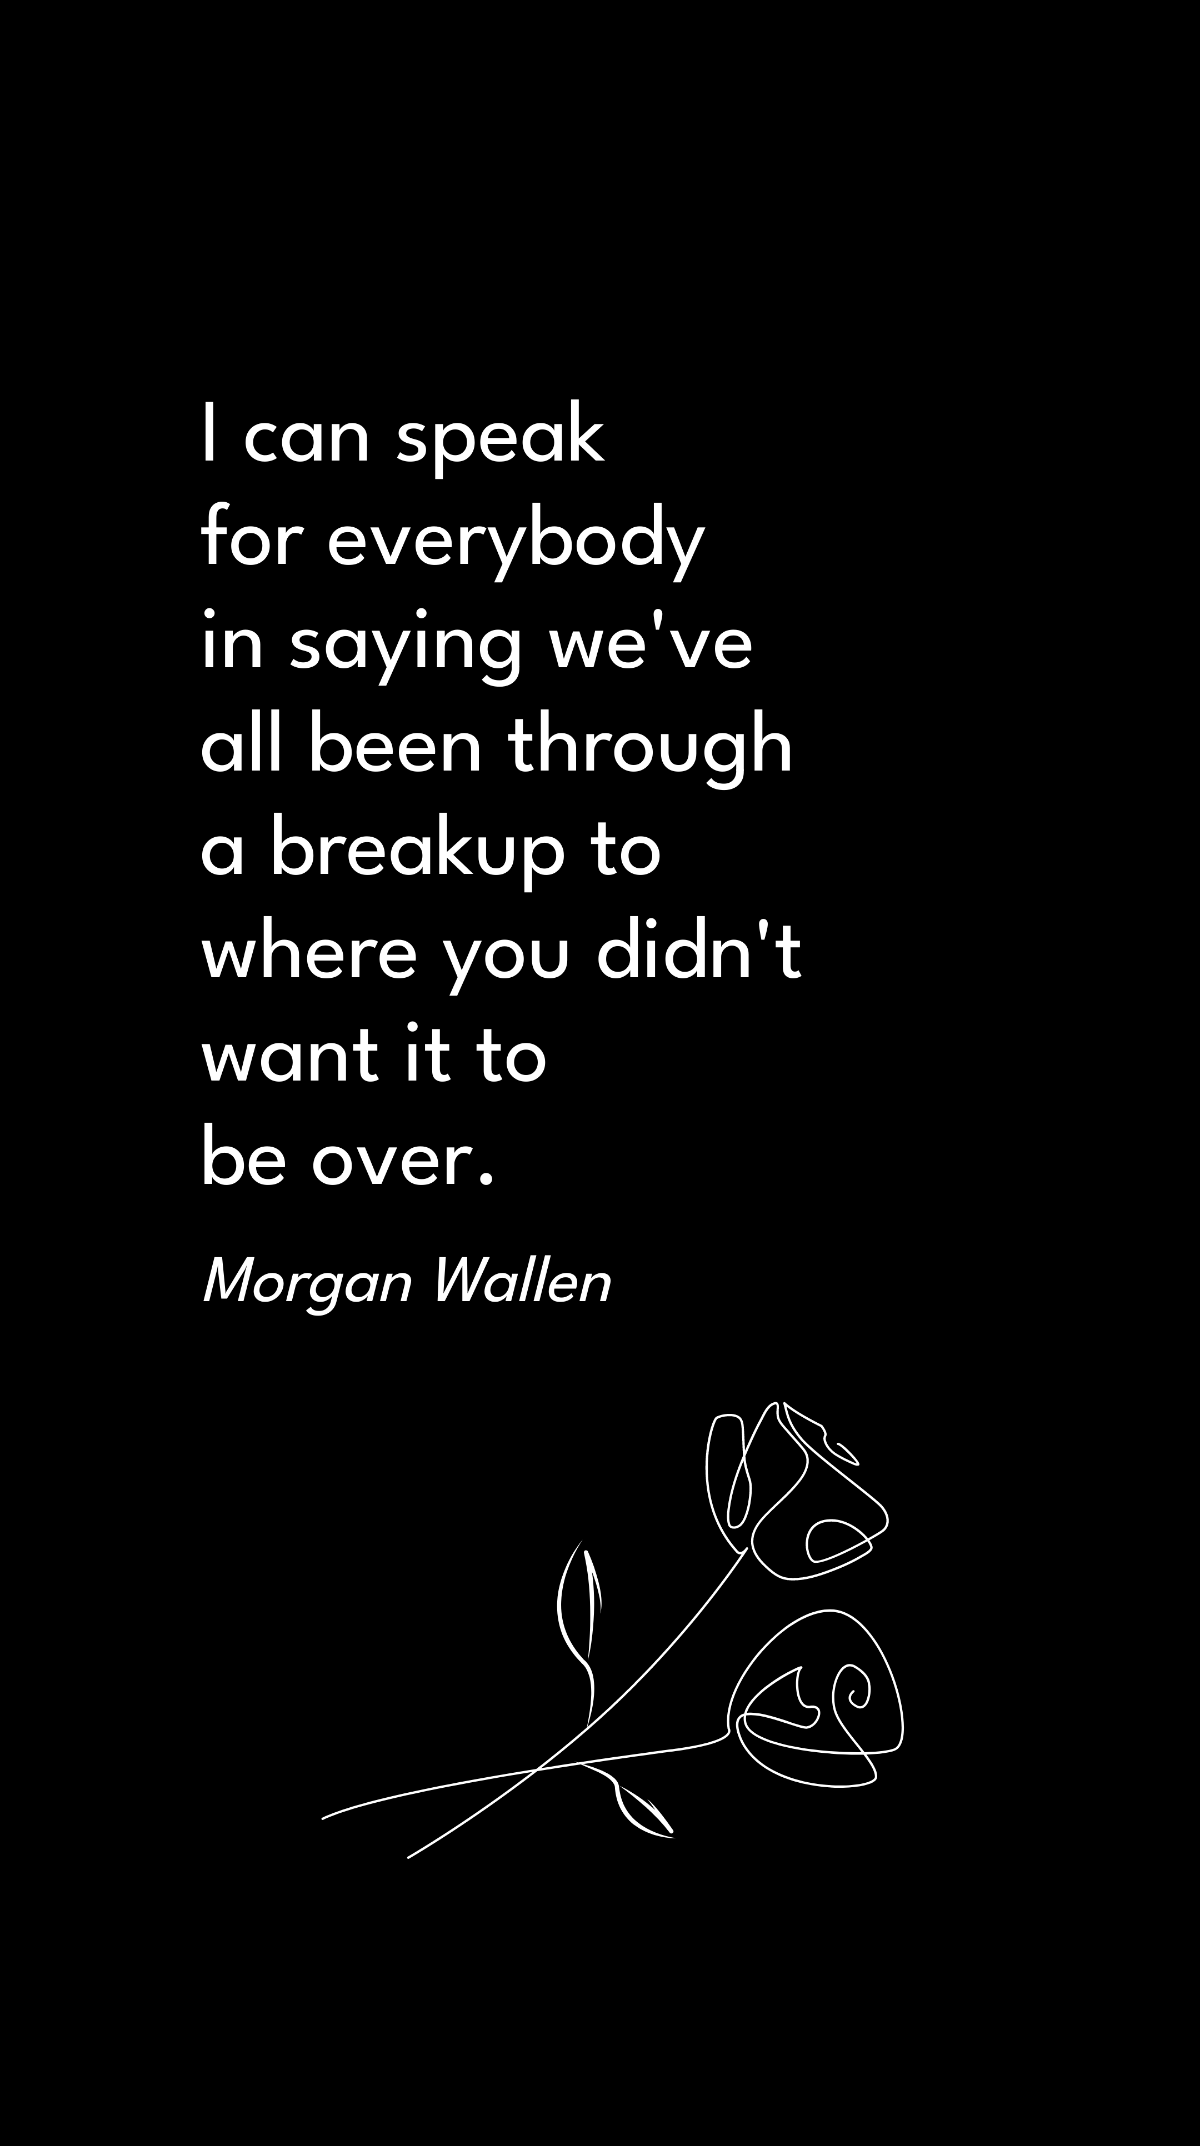 Free Morgan Wallen - I can speak for everybody in saying we've all been through a breakup to where you didn't want it to be over. Template